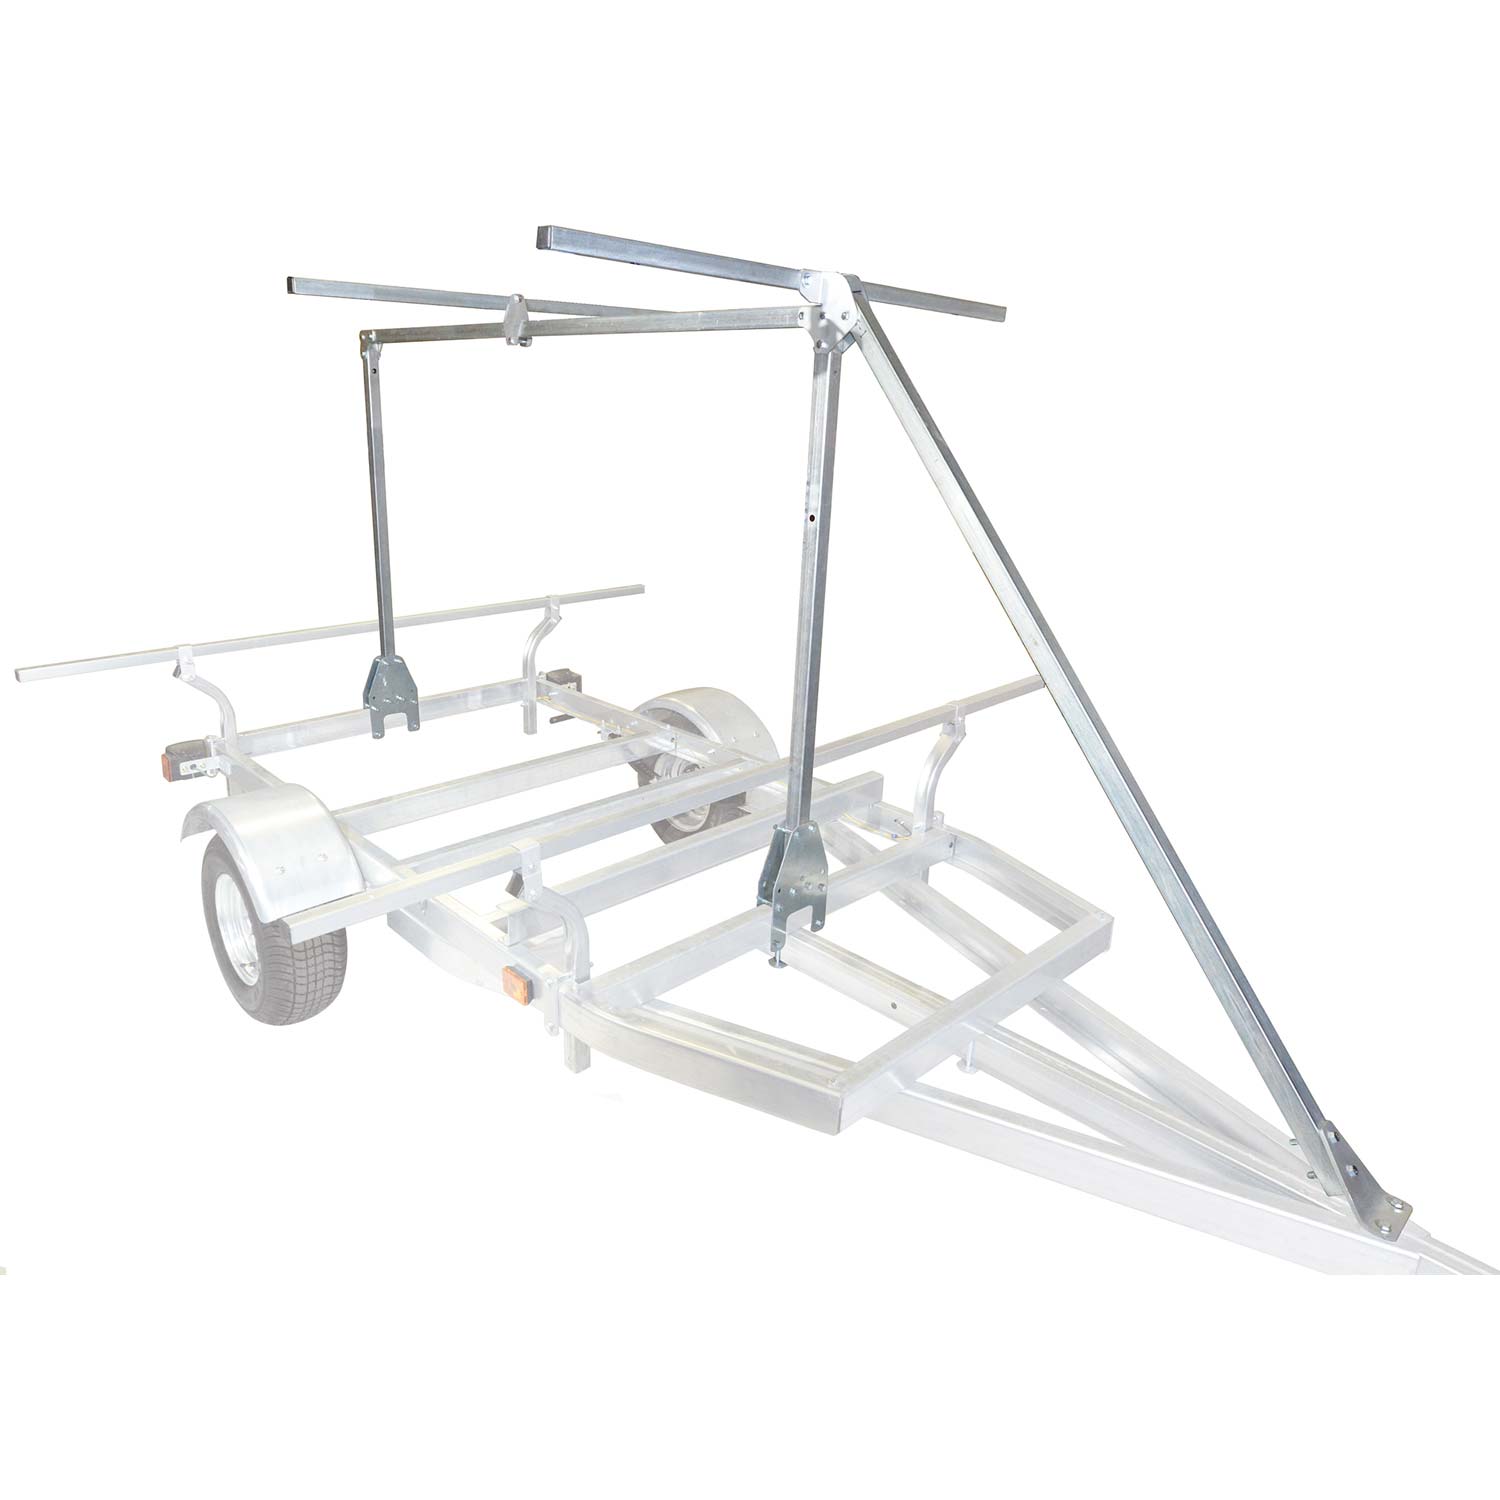 Malone MegaSport 2nd Tier Kit with Load Bars trailer